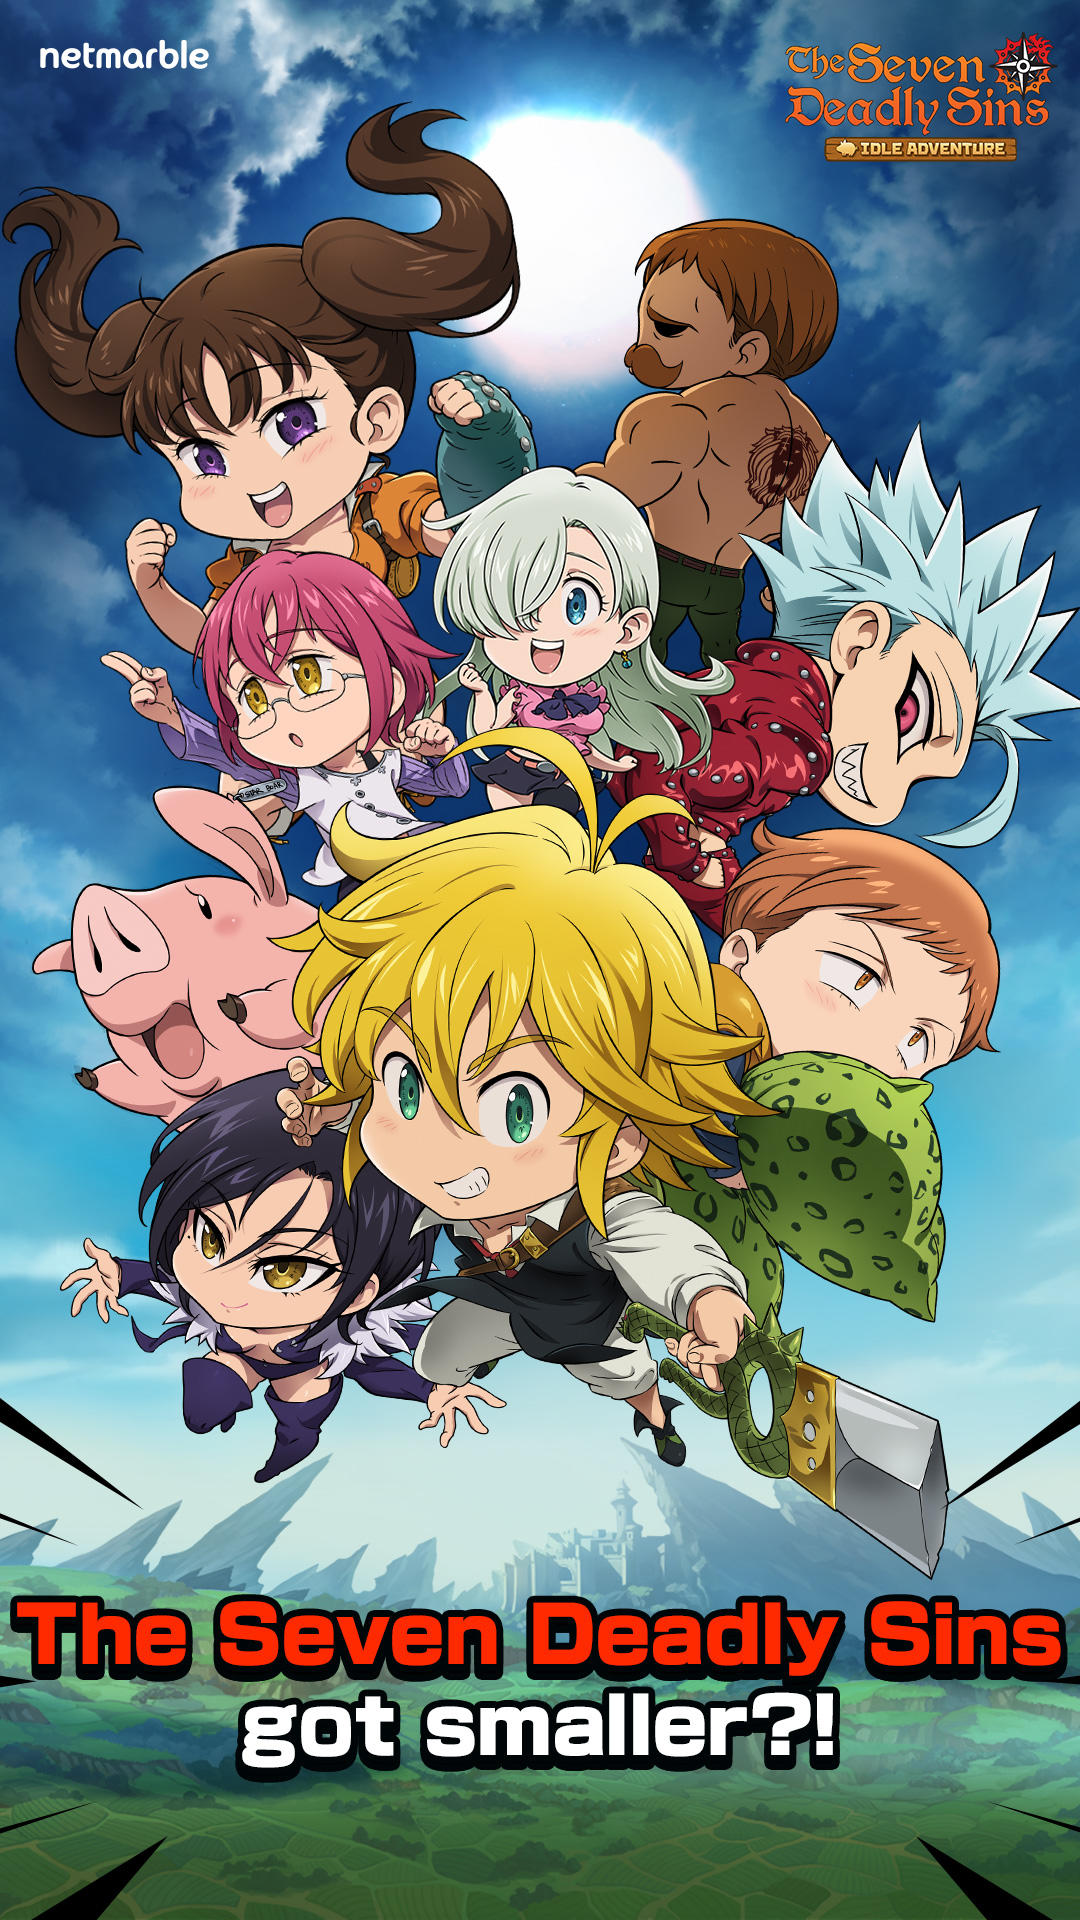 The Seven Deadly Sins: Idle screenshot game